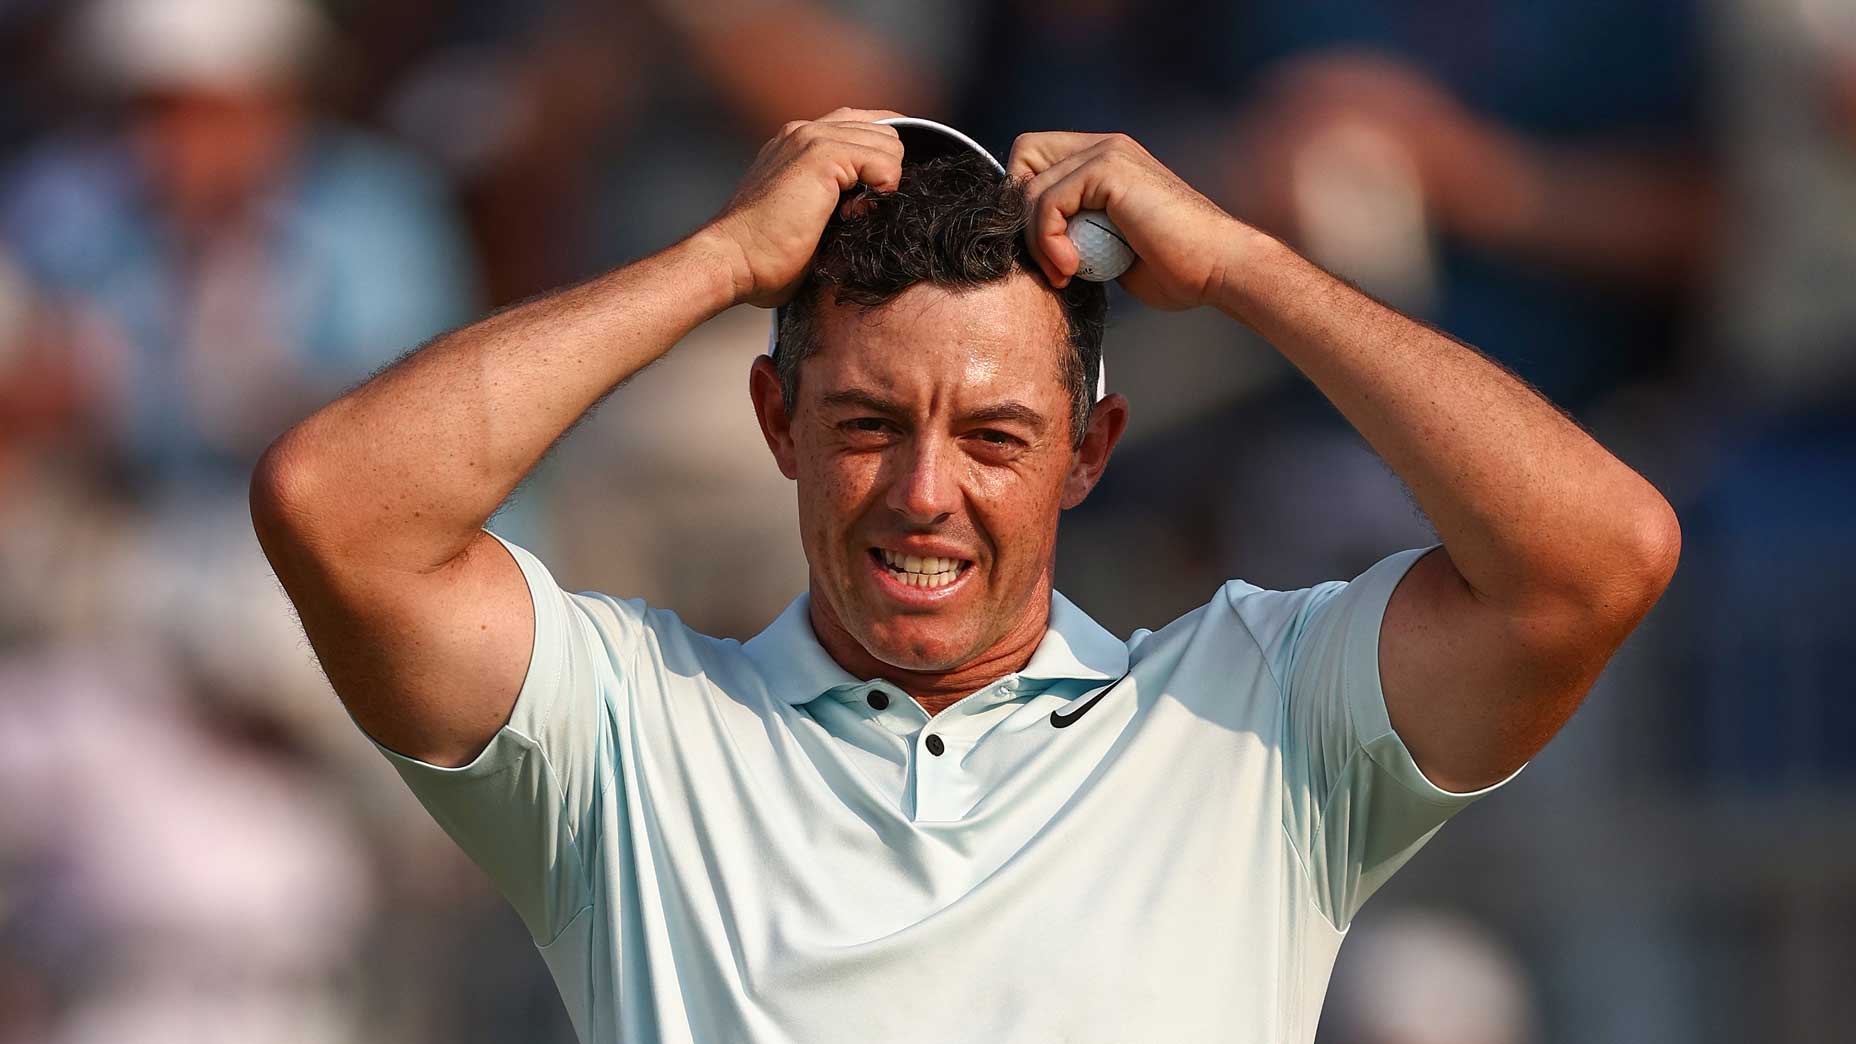 Rory McIlroy came painfully close to a U.S. Open title on Sunday.